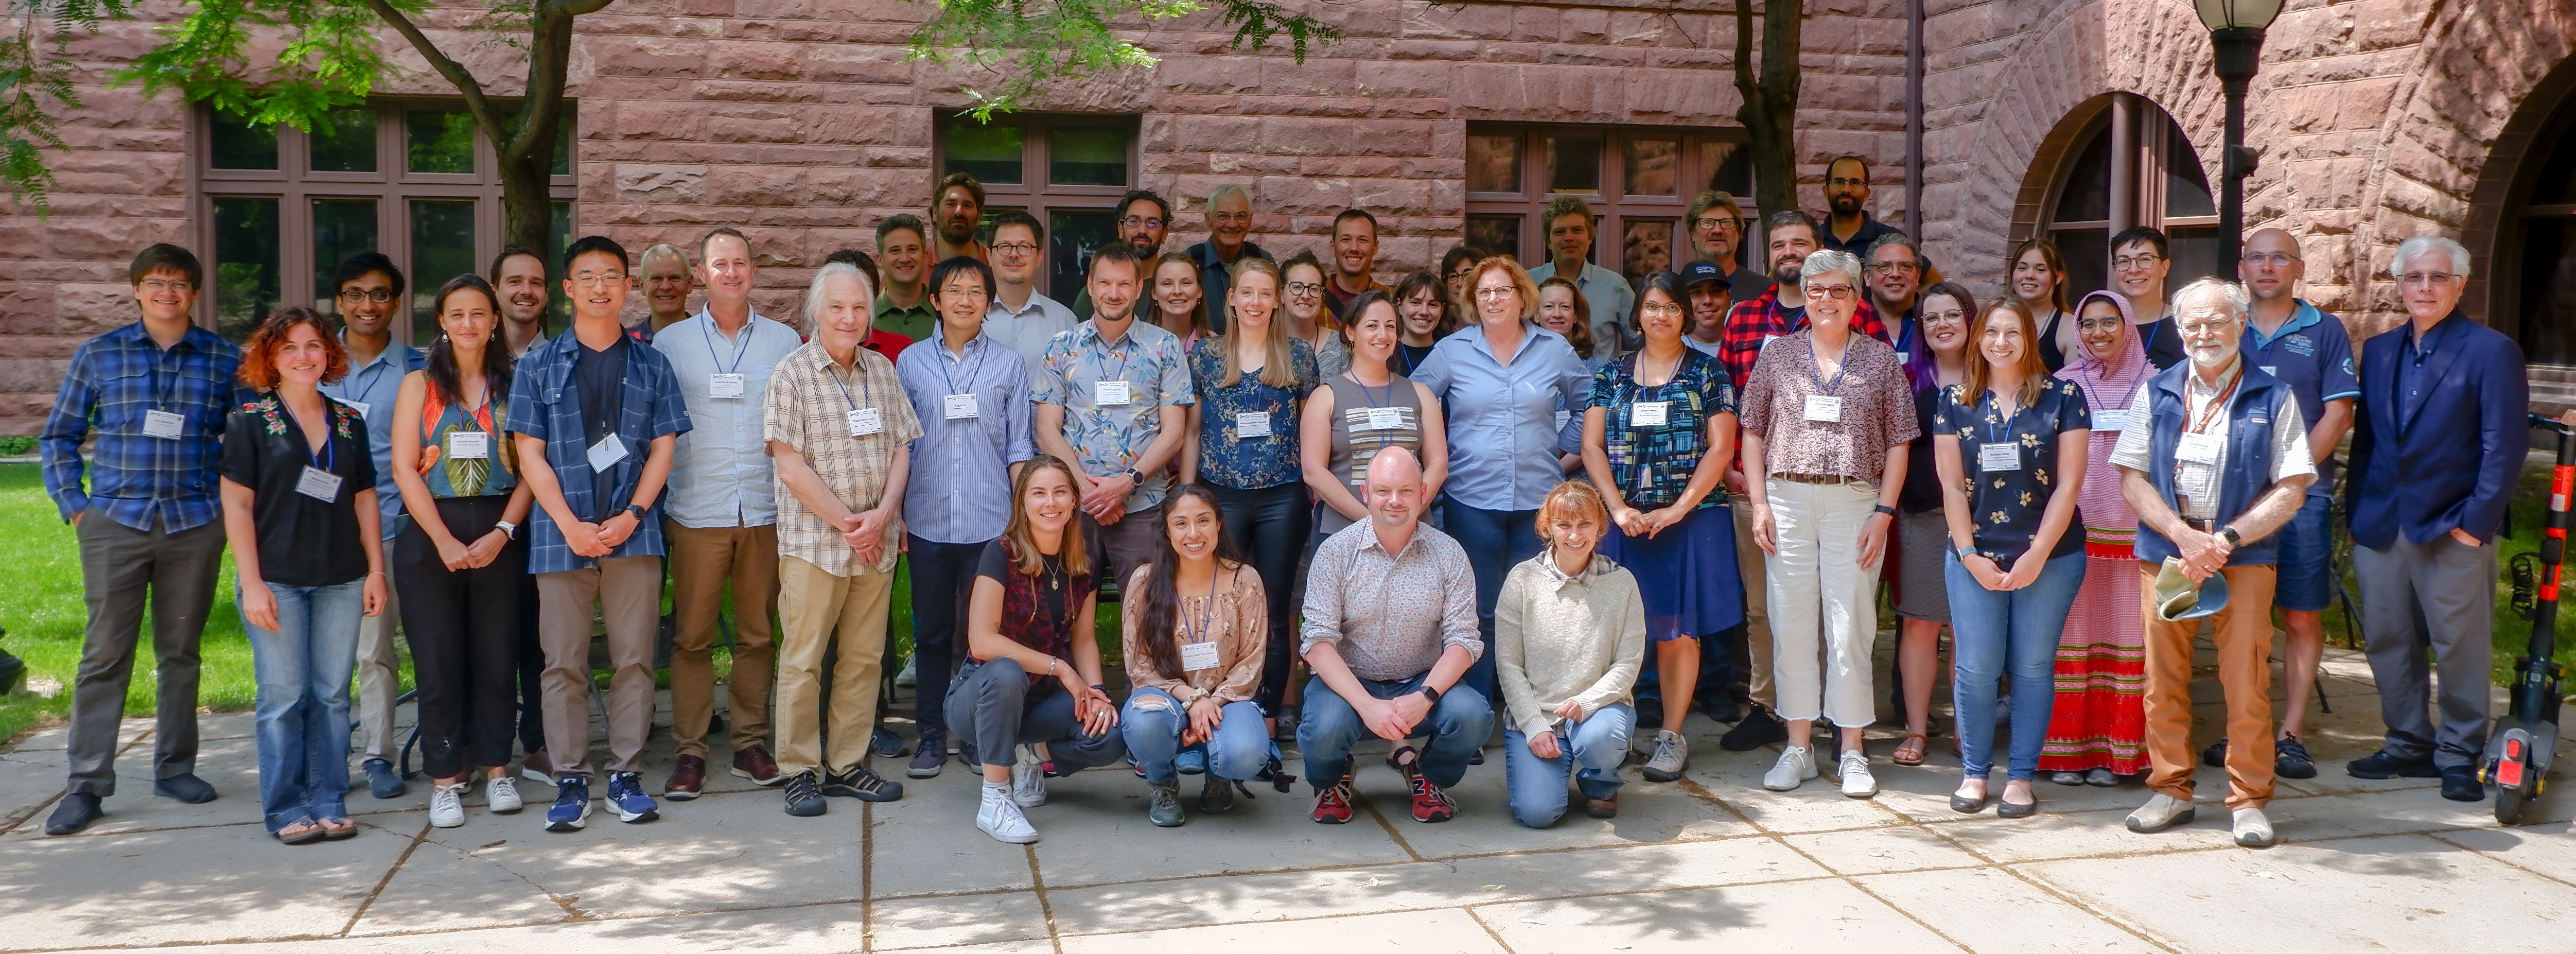 Group photo of the 2023 IRM Conference participants